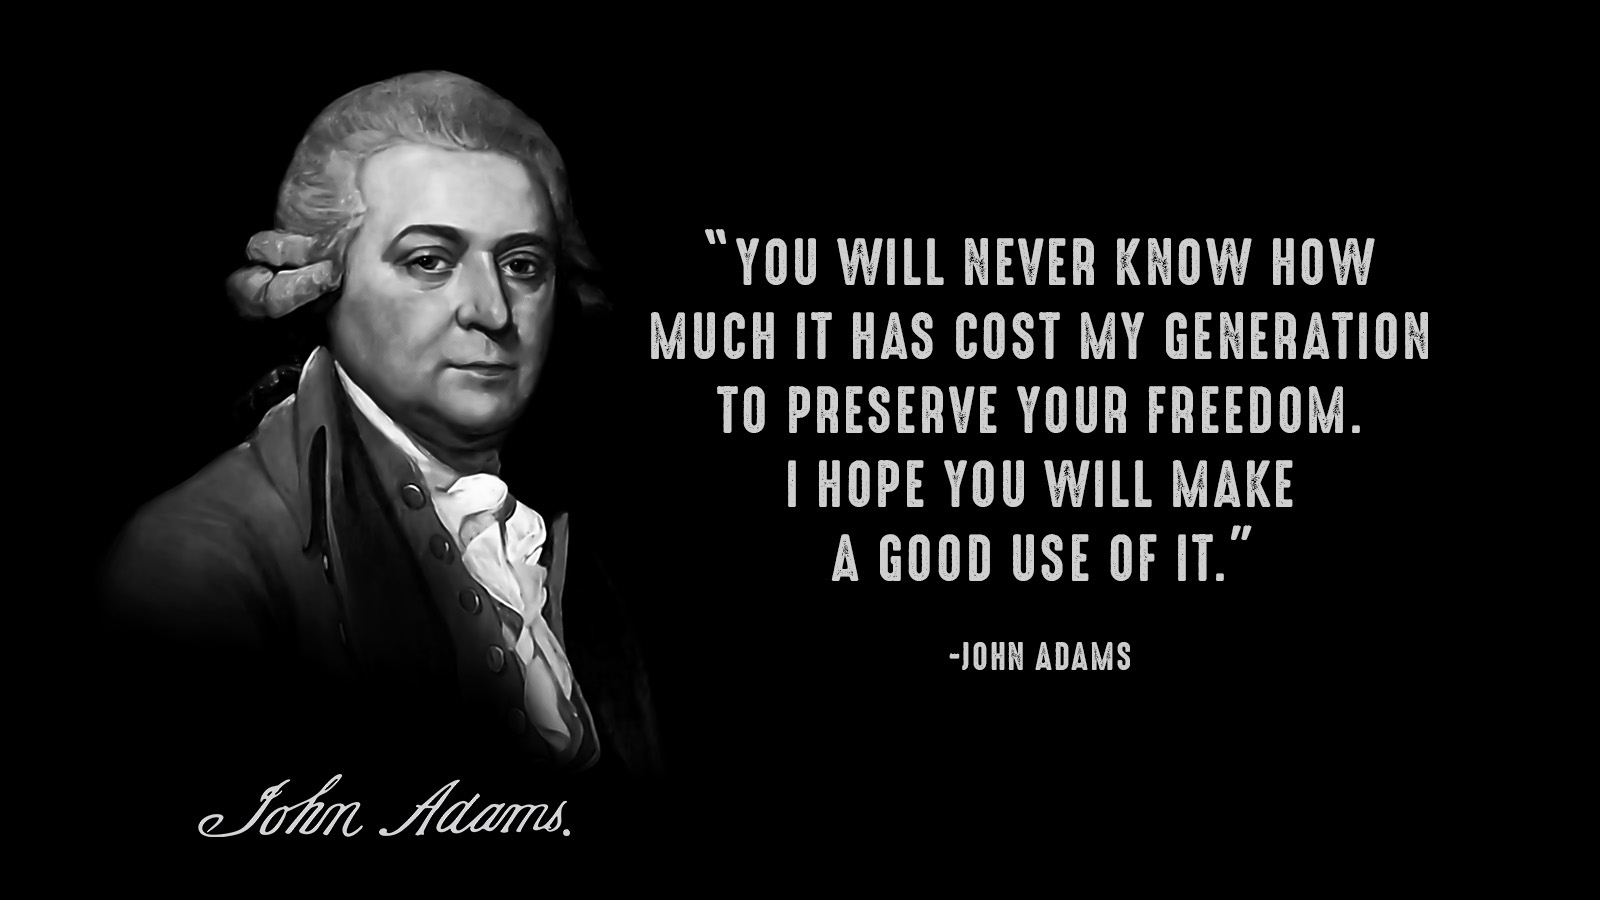 Quote from John Adams, 'You will never know how much it has cost my generation to preserve your freedom. I hope you will make a good use of it.'